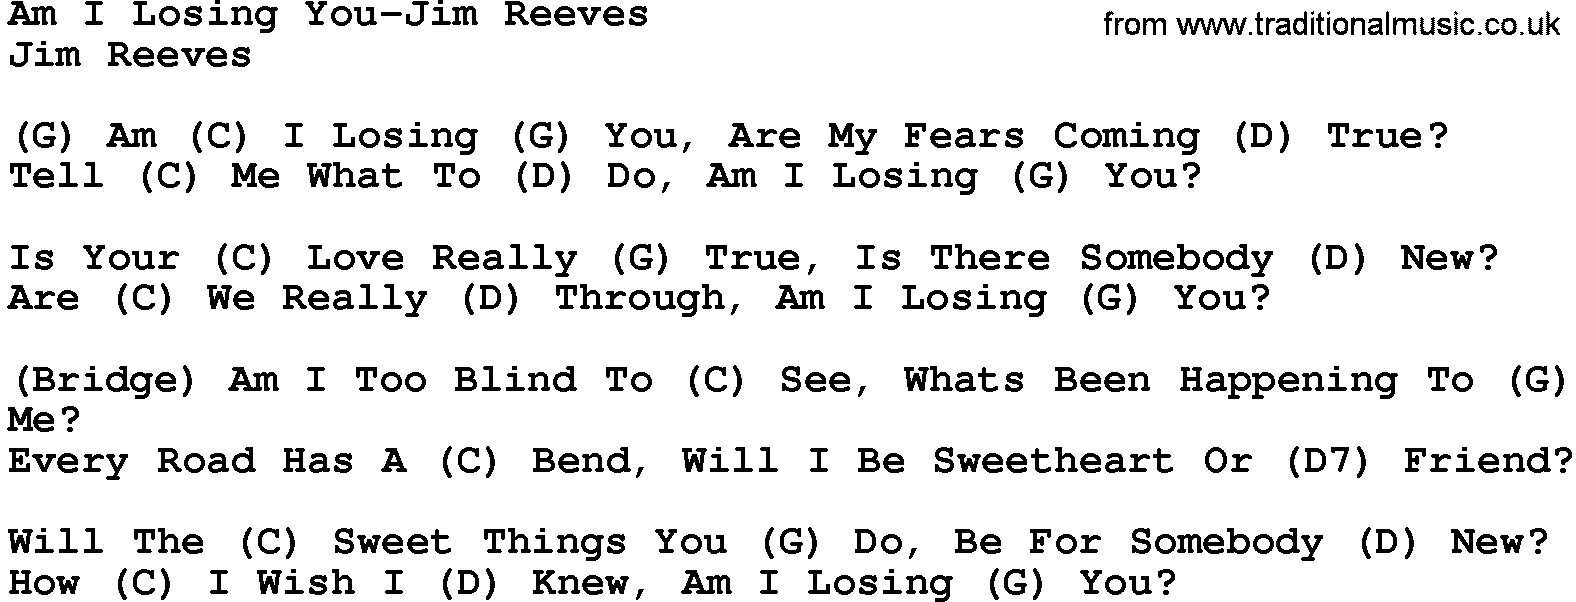 Country music song: Am I Losing You-Jim Reeves lyrics and chords